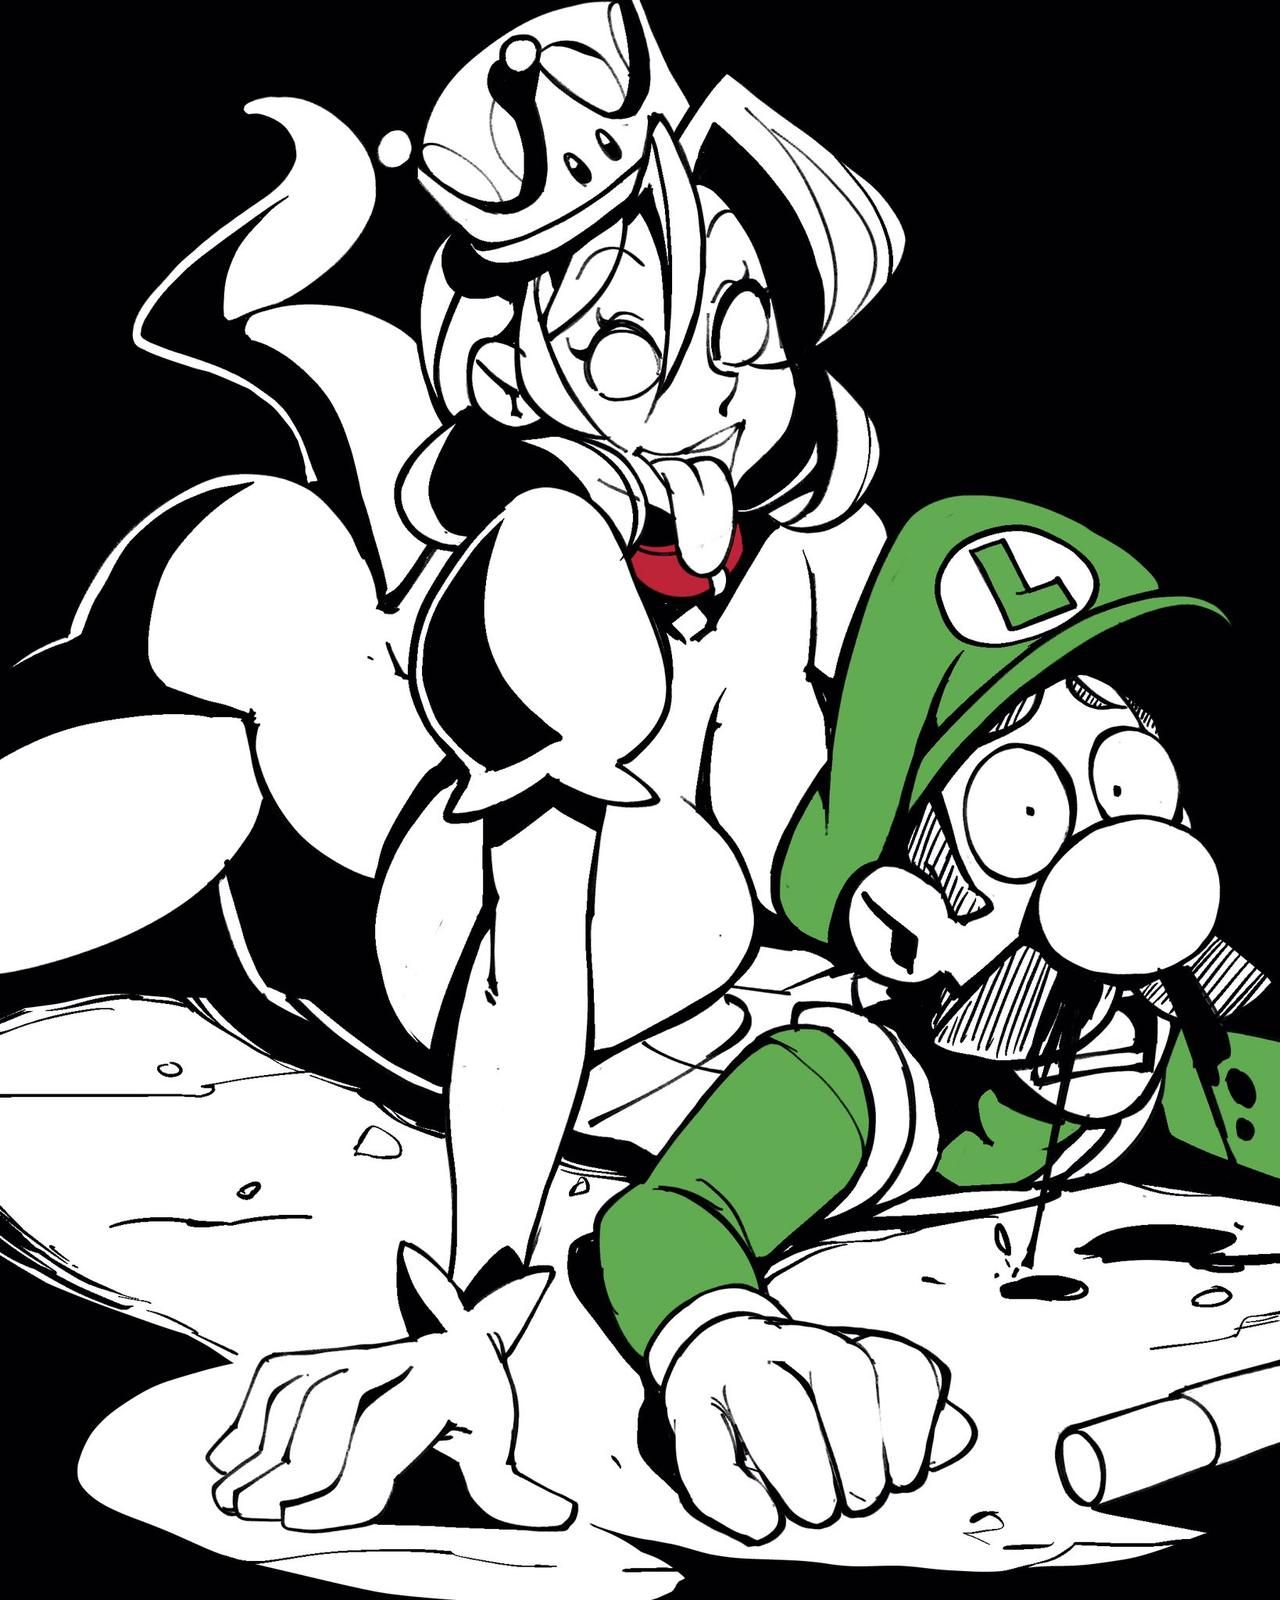 [Nisego] Inktober 2019 (Super Mario Brothers) [Ongoing] 12